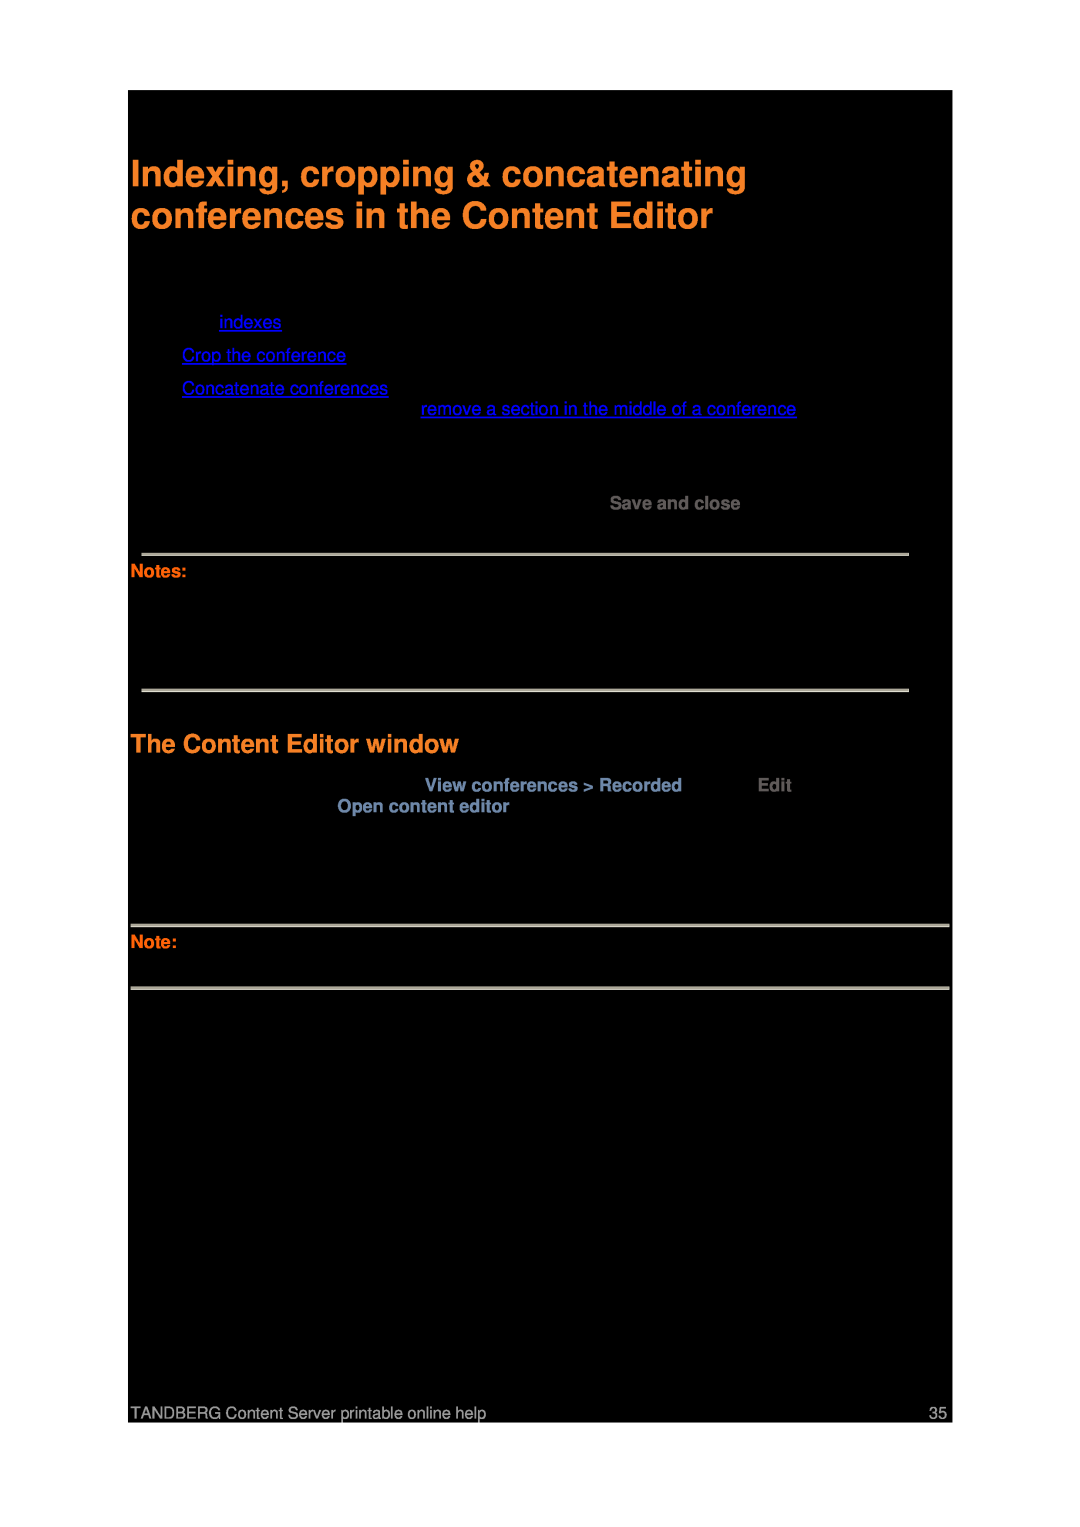 TANDBERG D1459501 manual The Content Editor window, Indexing, cropping & concatenating conferences in the Content Editor 